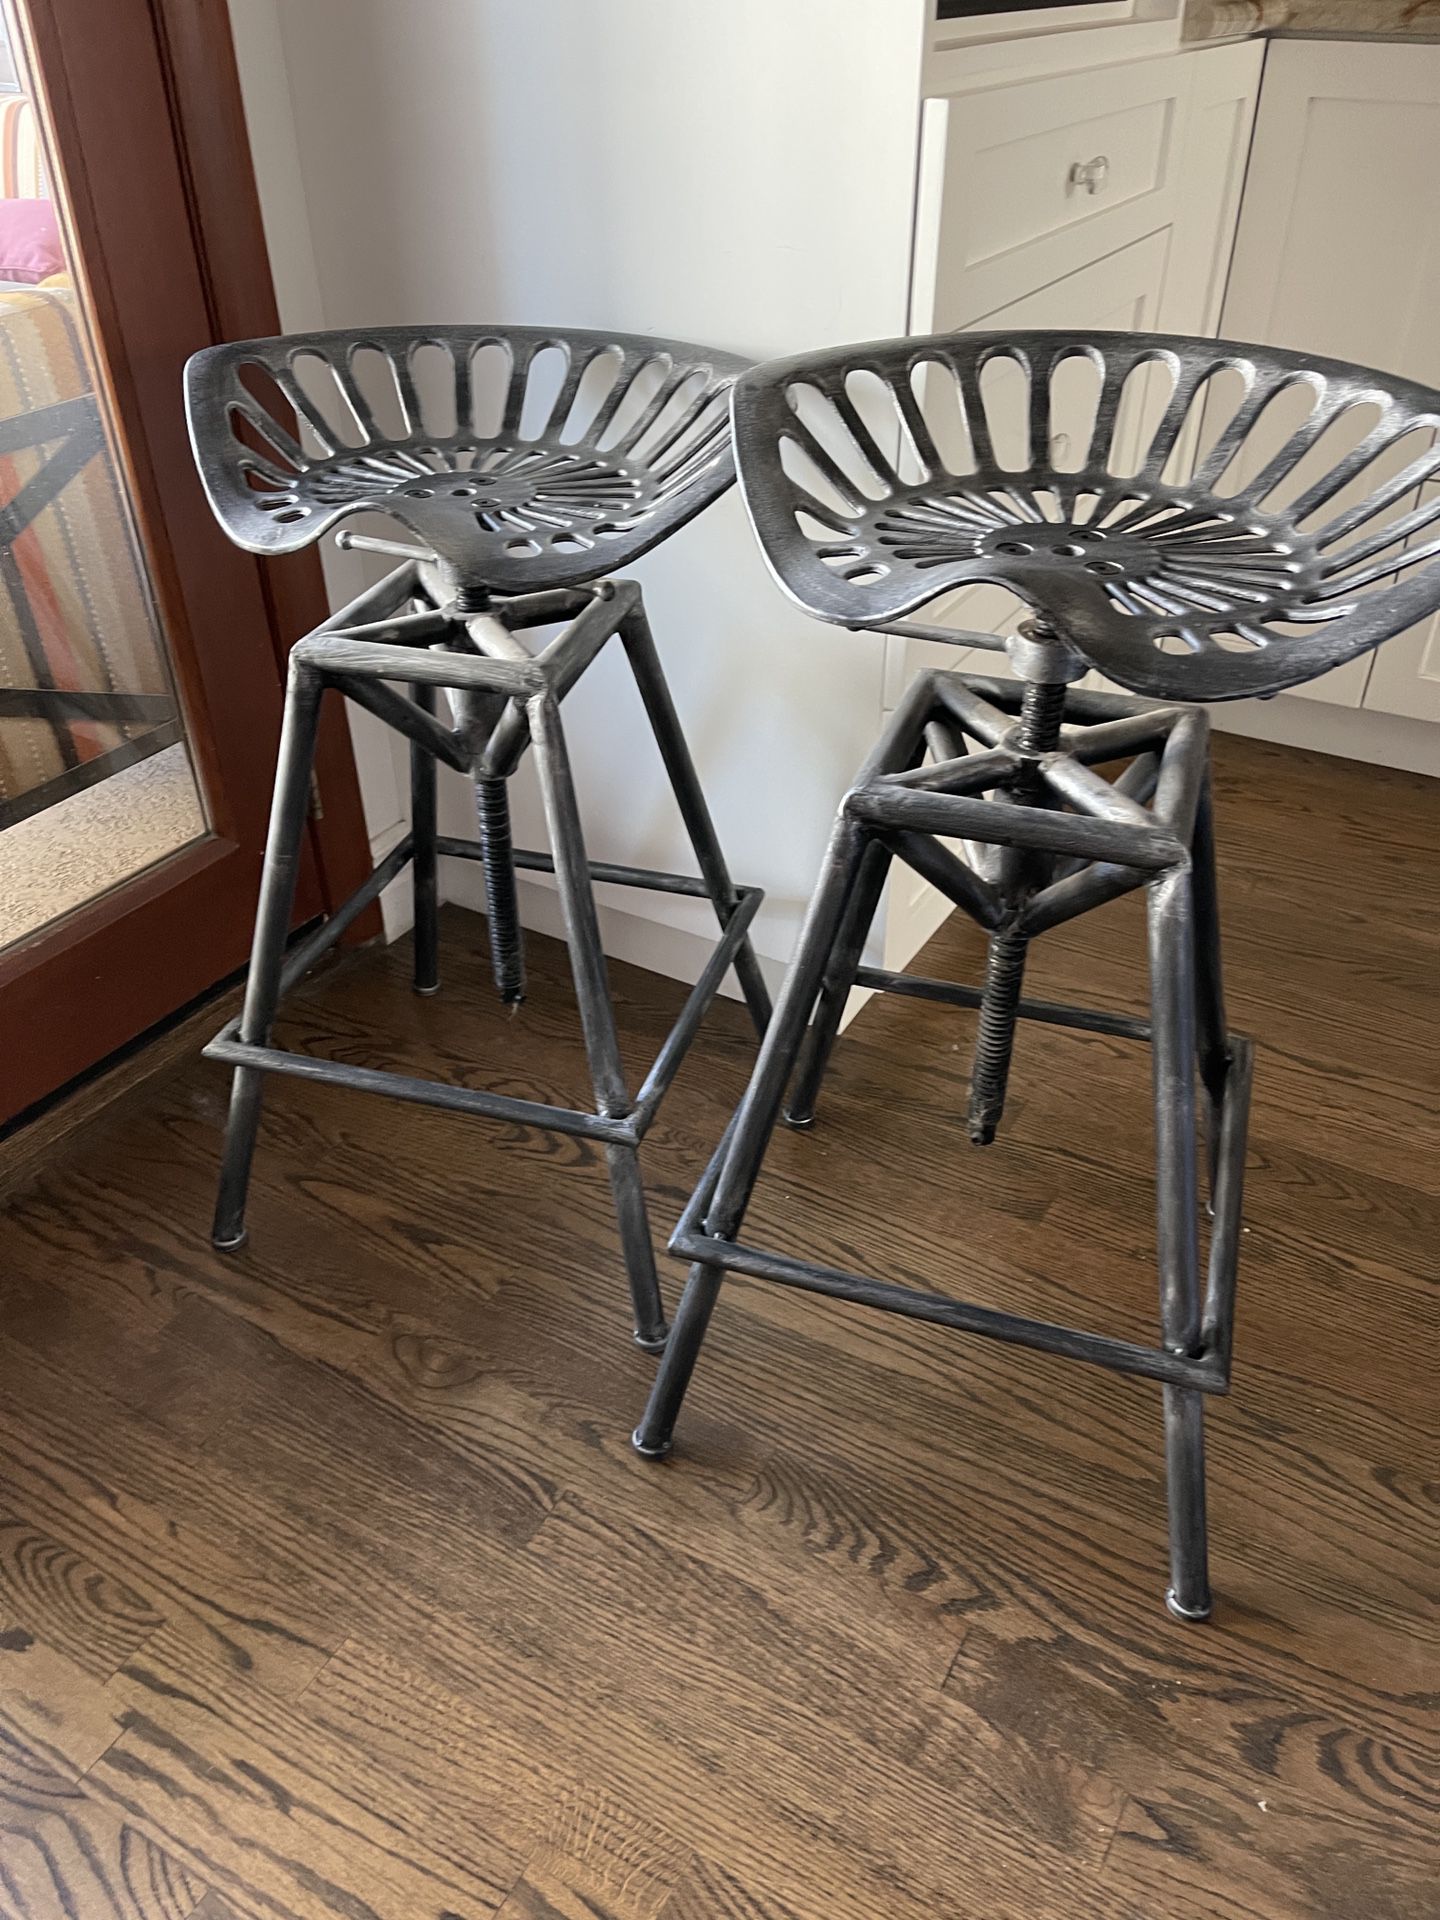 Two Tractor Seat Stools